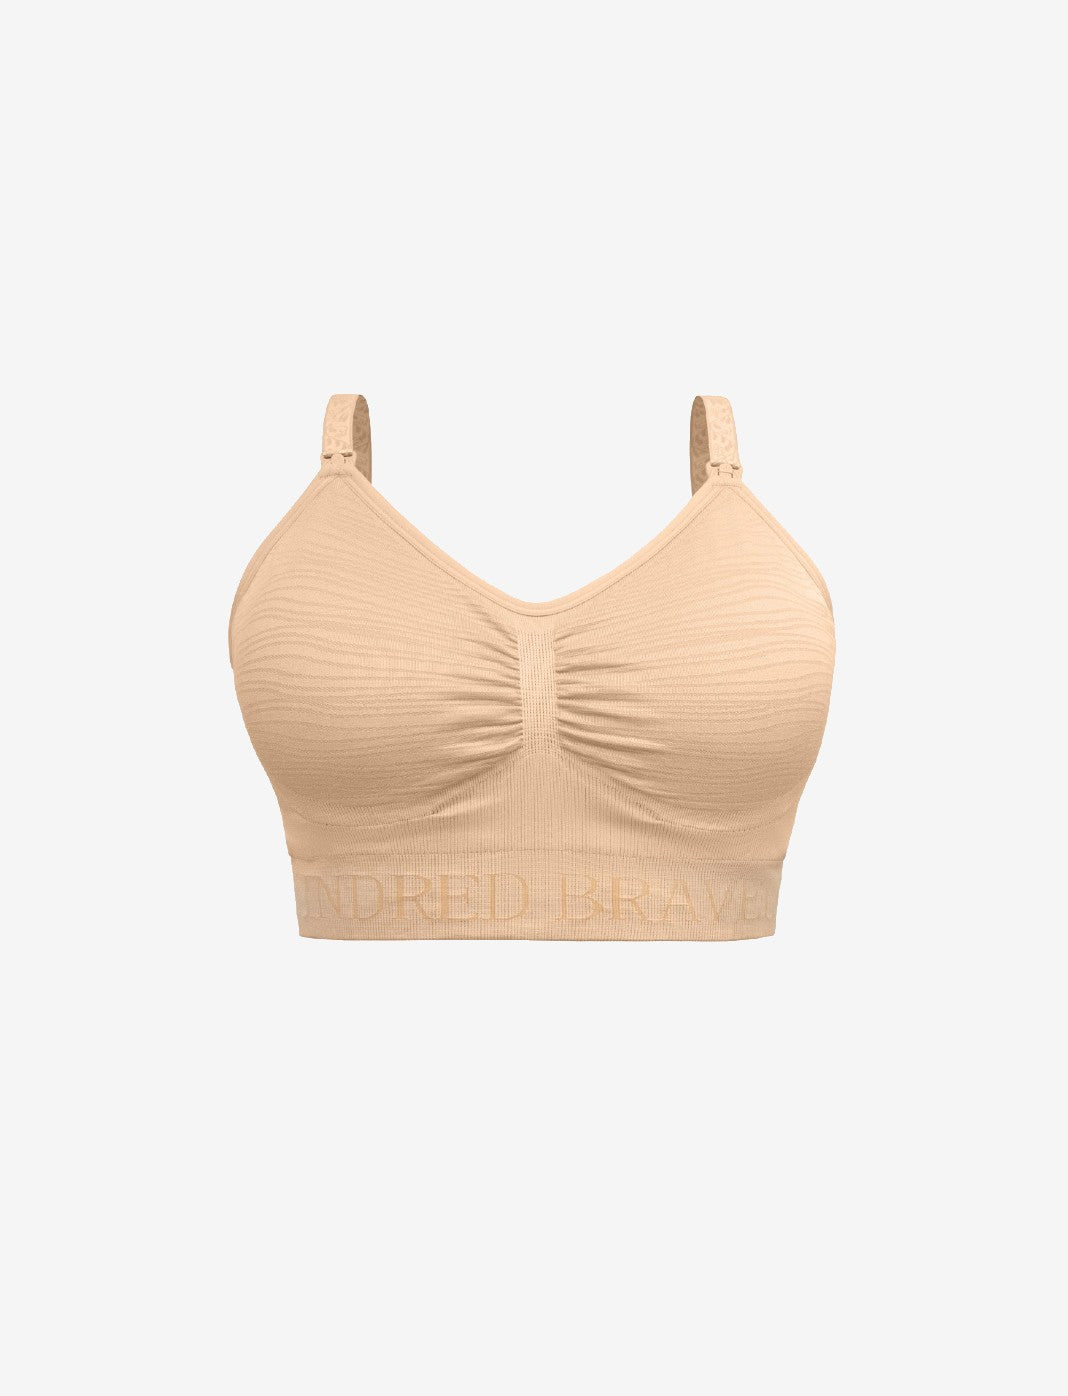 Kindred Bravely 3-Pack Hands Free Pumping Bra Wash, Wear, Spare Bundle  (Beige/Black, Medium-Busty) at  Women's Clothing store